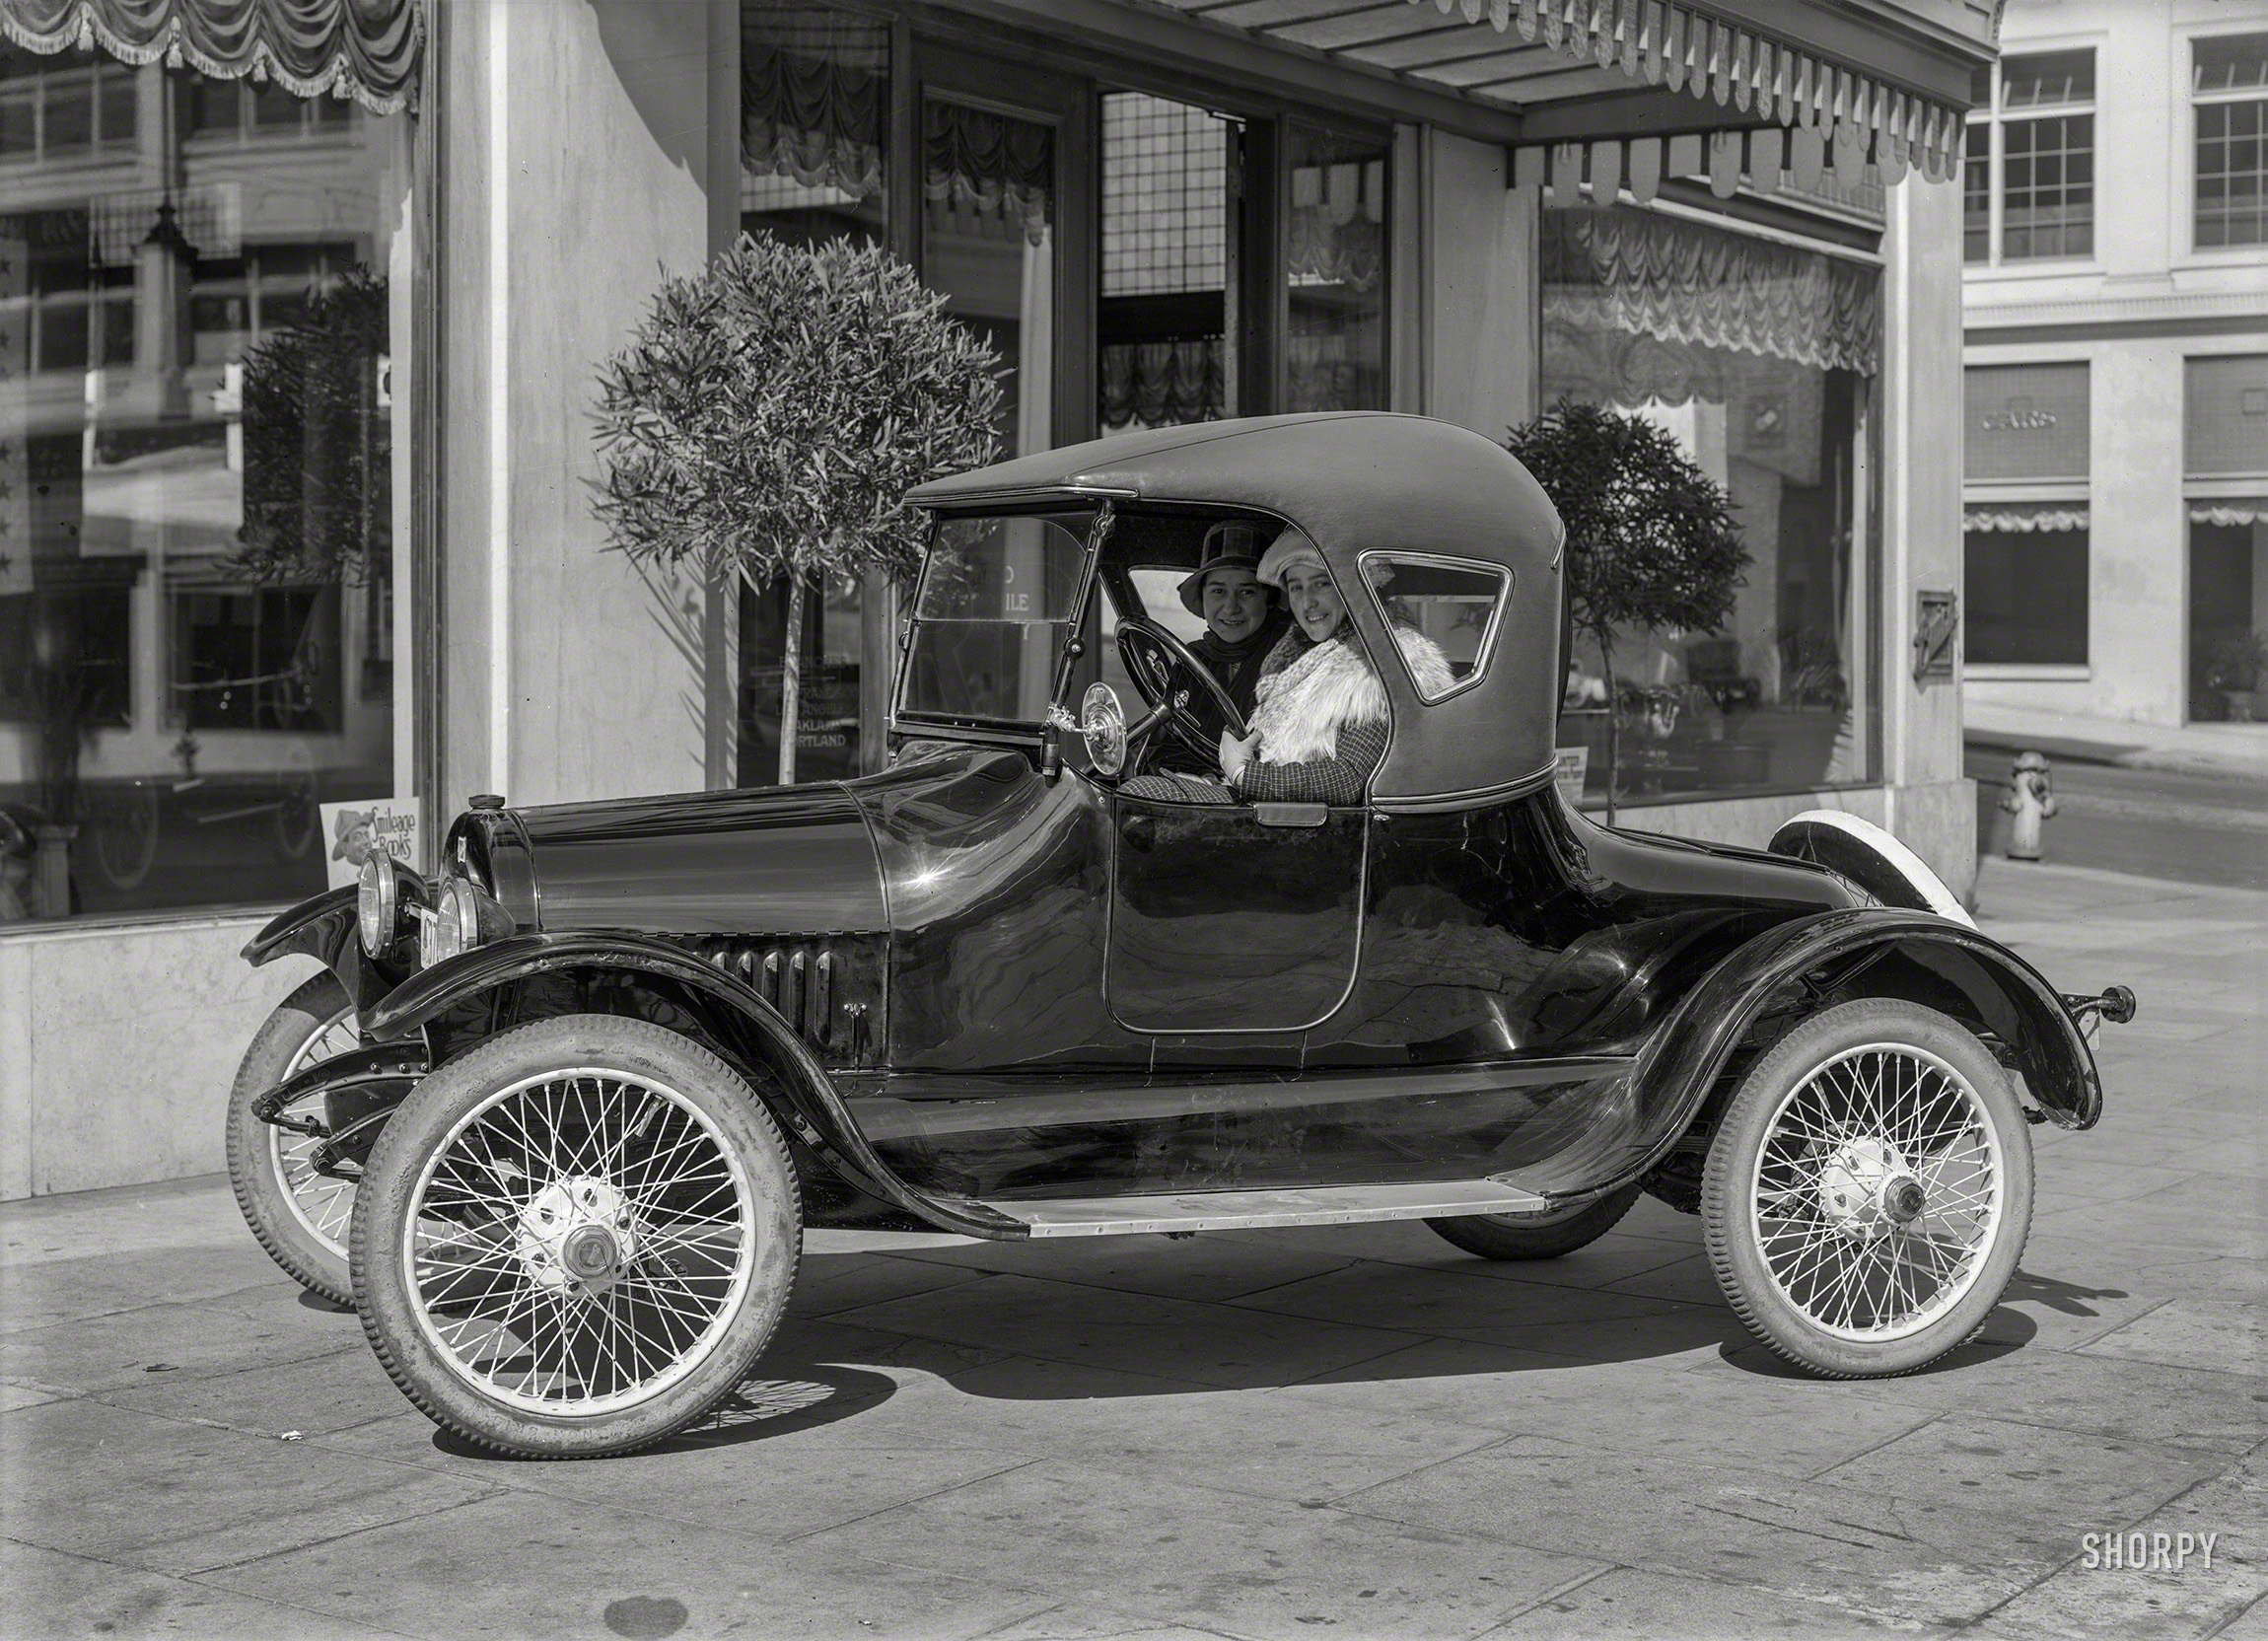 San Francisco, 1918. "Buick roadster at agency." The ideal conveyance for madcap motoring. 5x7 inch glass negative by Christopher Helin. View full size.